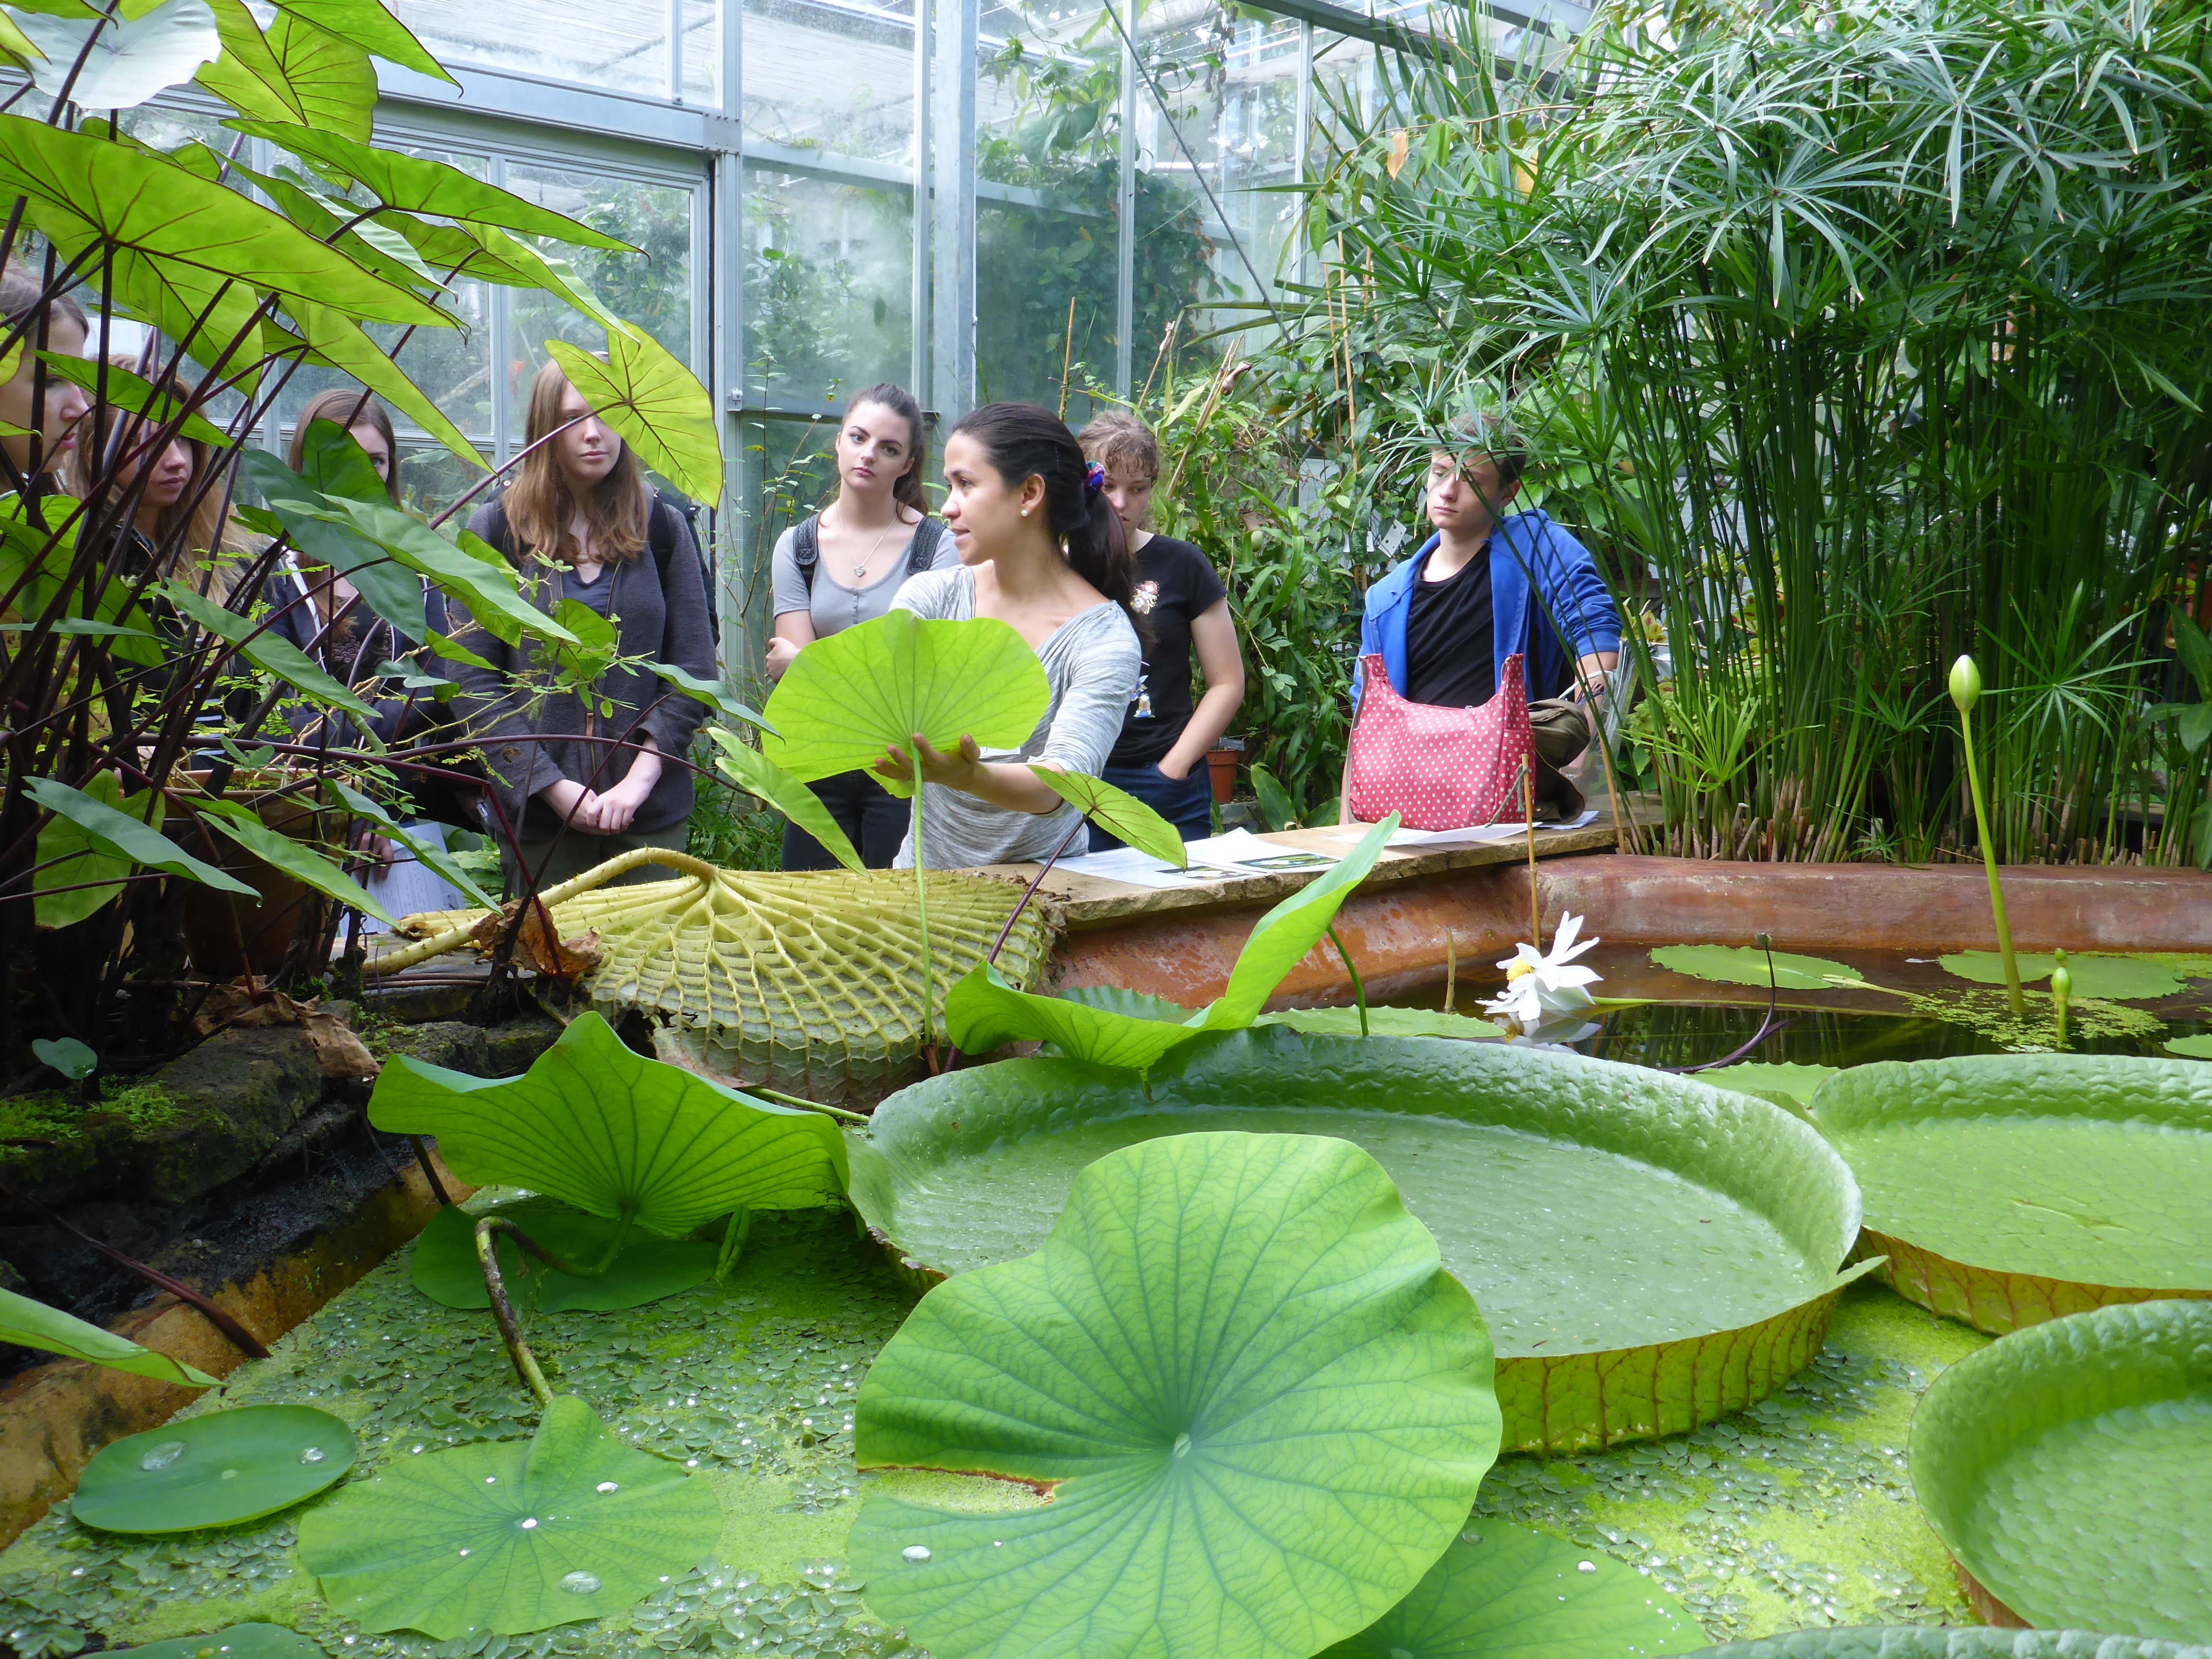 A pond with a lily pad in the foreground. Staff and students are further back in the image and they are discussing what is in front of them.